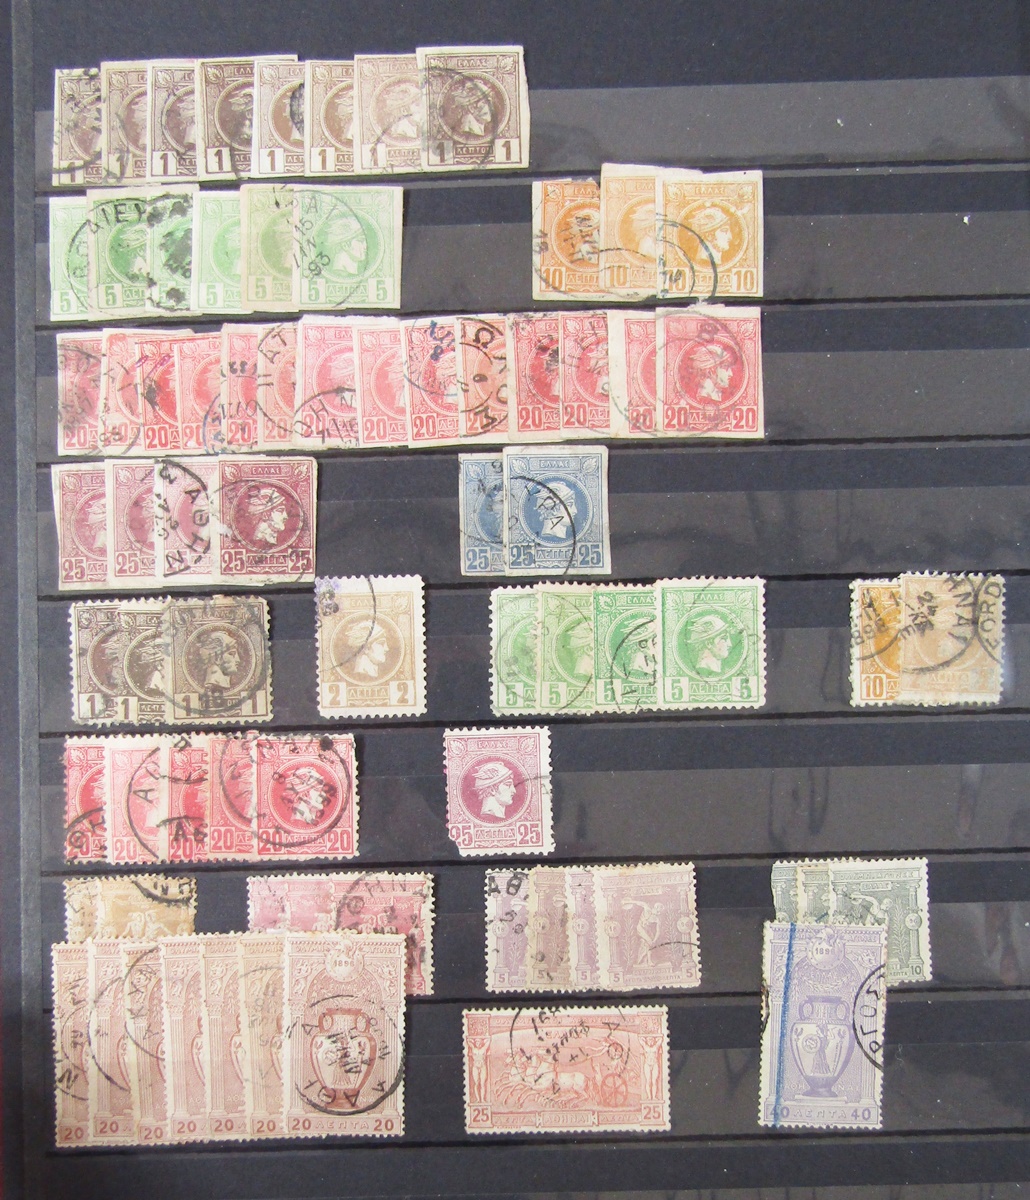 Stamps of Greece: Box of 100s of definitives, commemoratives and other issues in 2 large stock- - Image 3 of 6